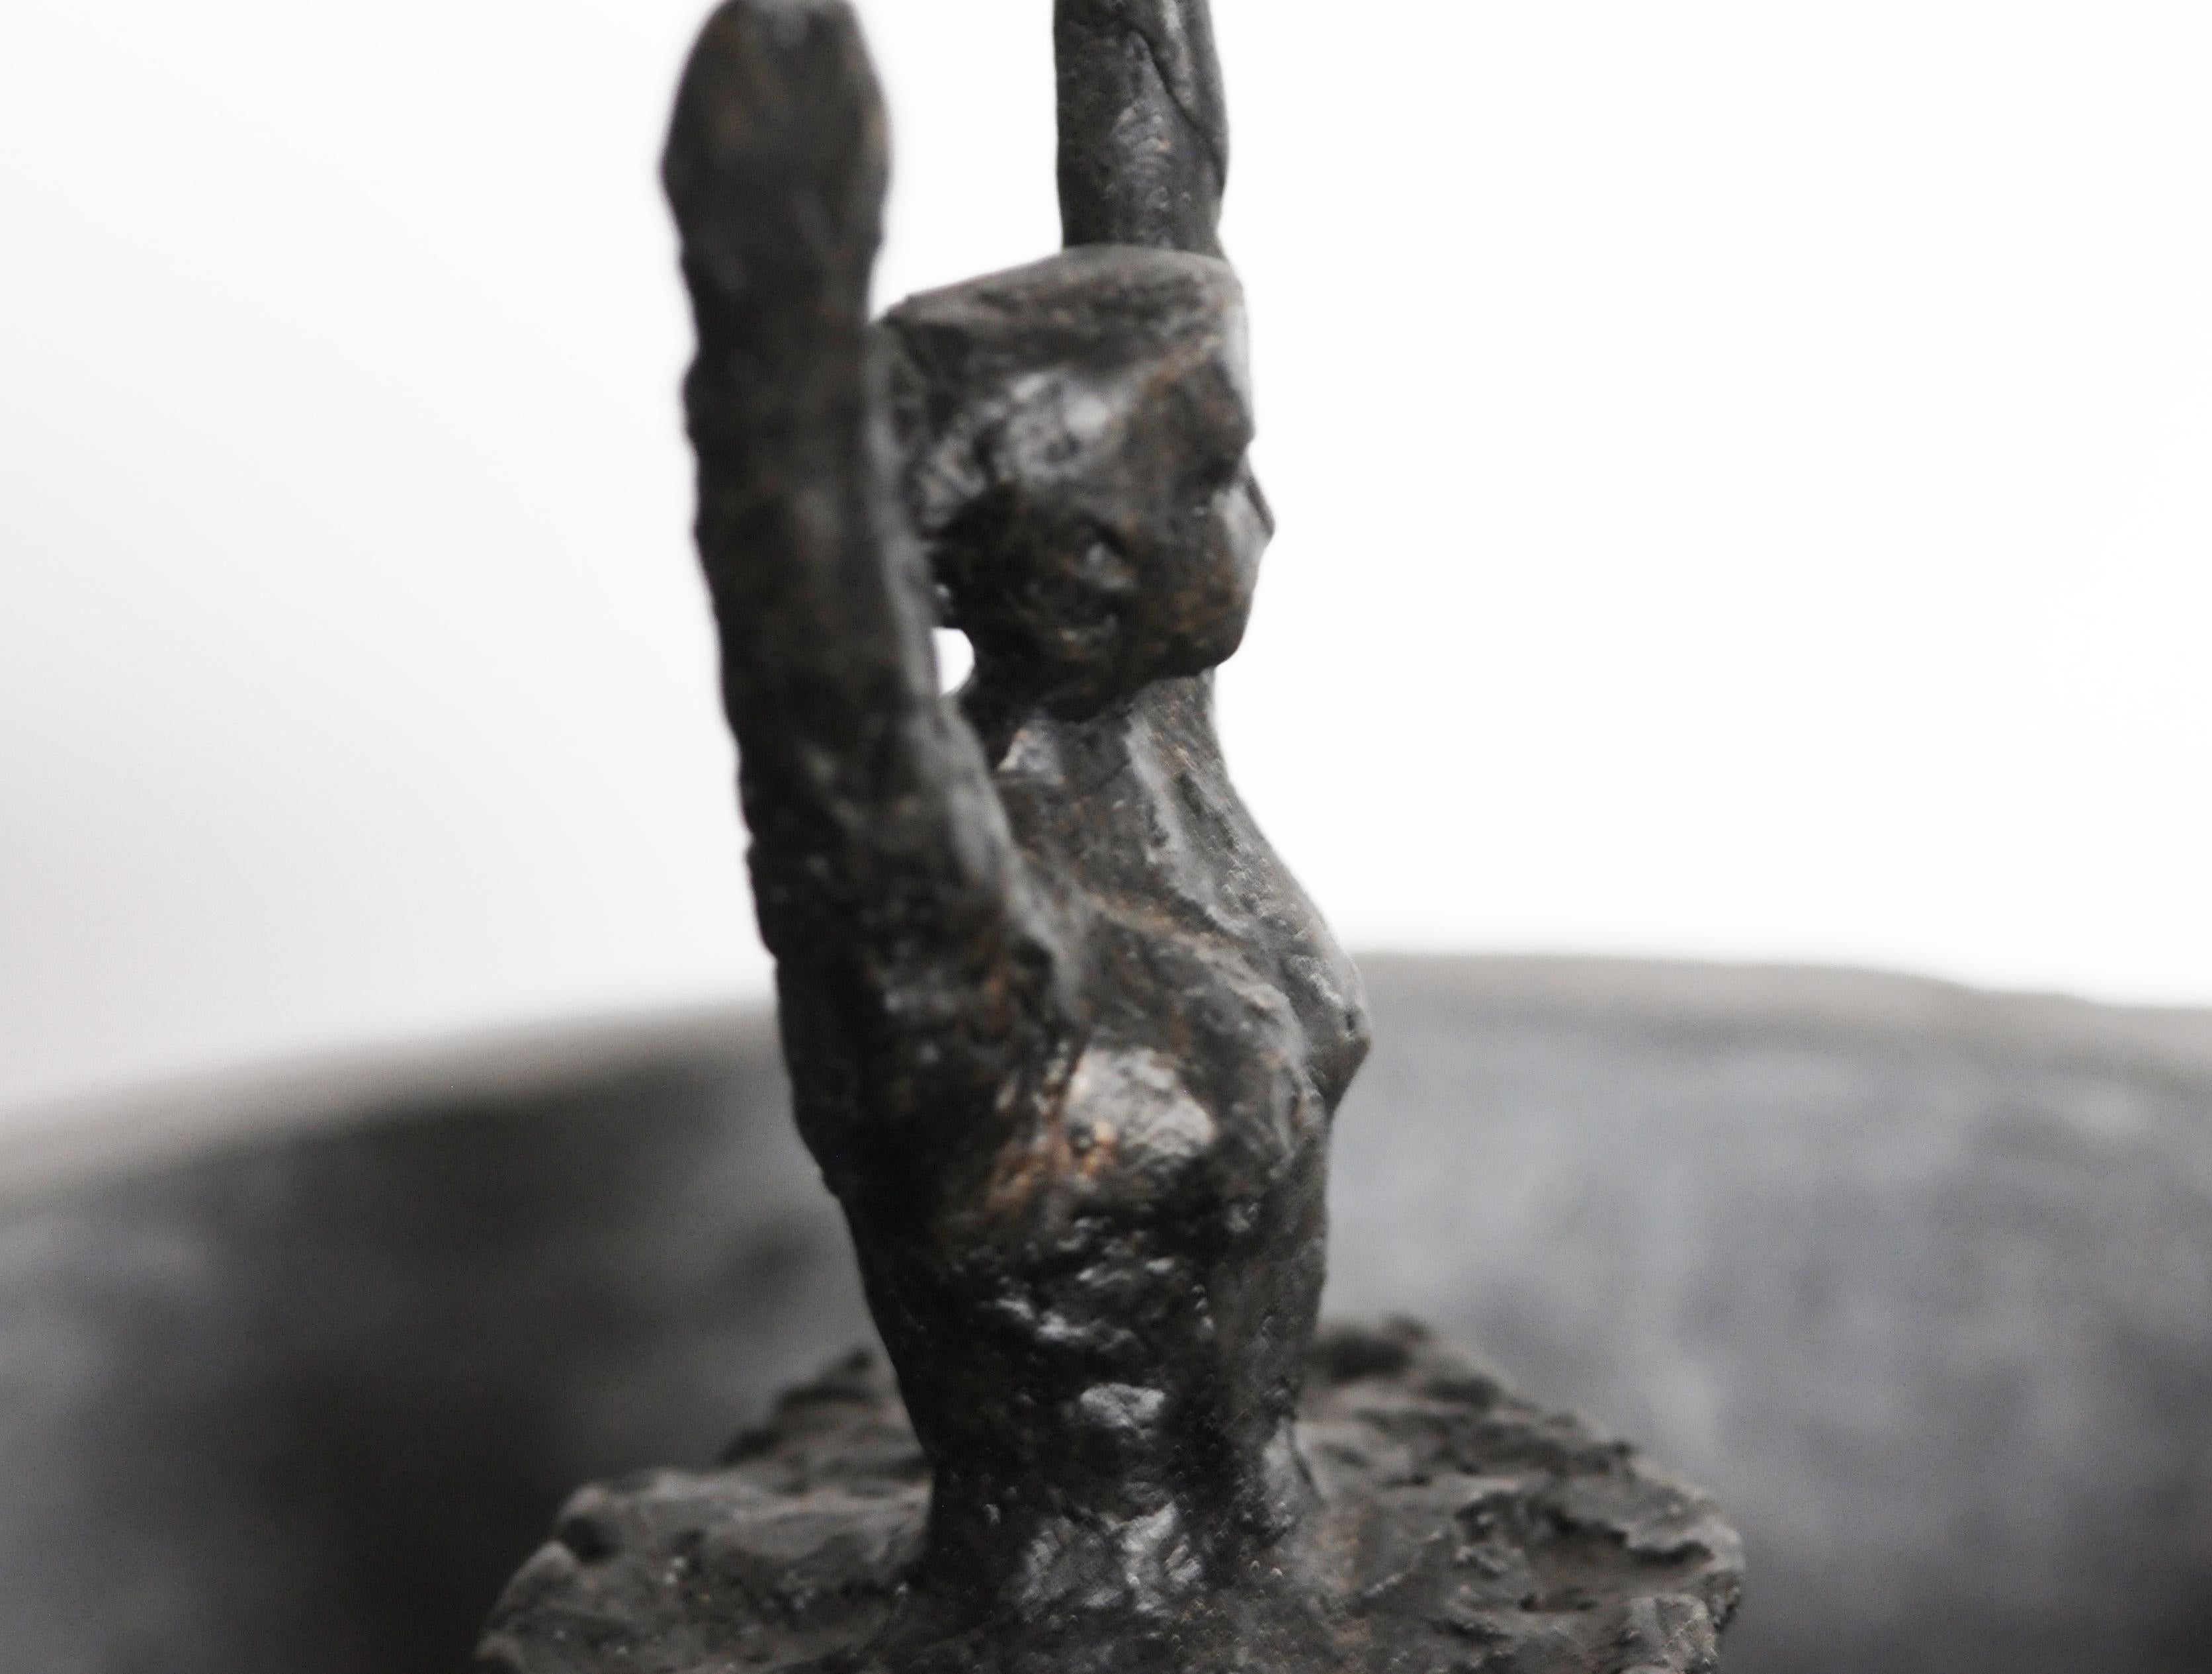 'Birth of Venus Williams' Cast Bronze Sculpture by David Bender In Excellent Condition For Sale In Brooklyn, NY